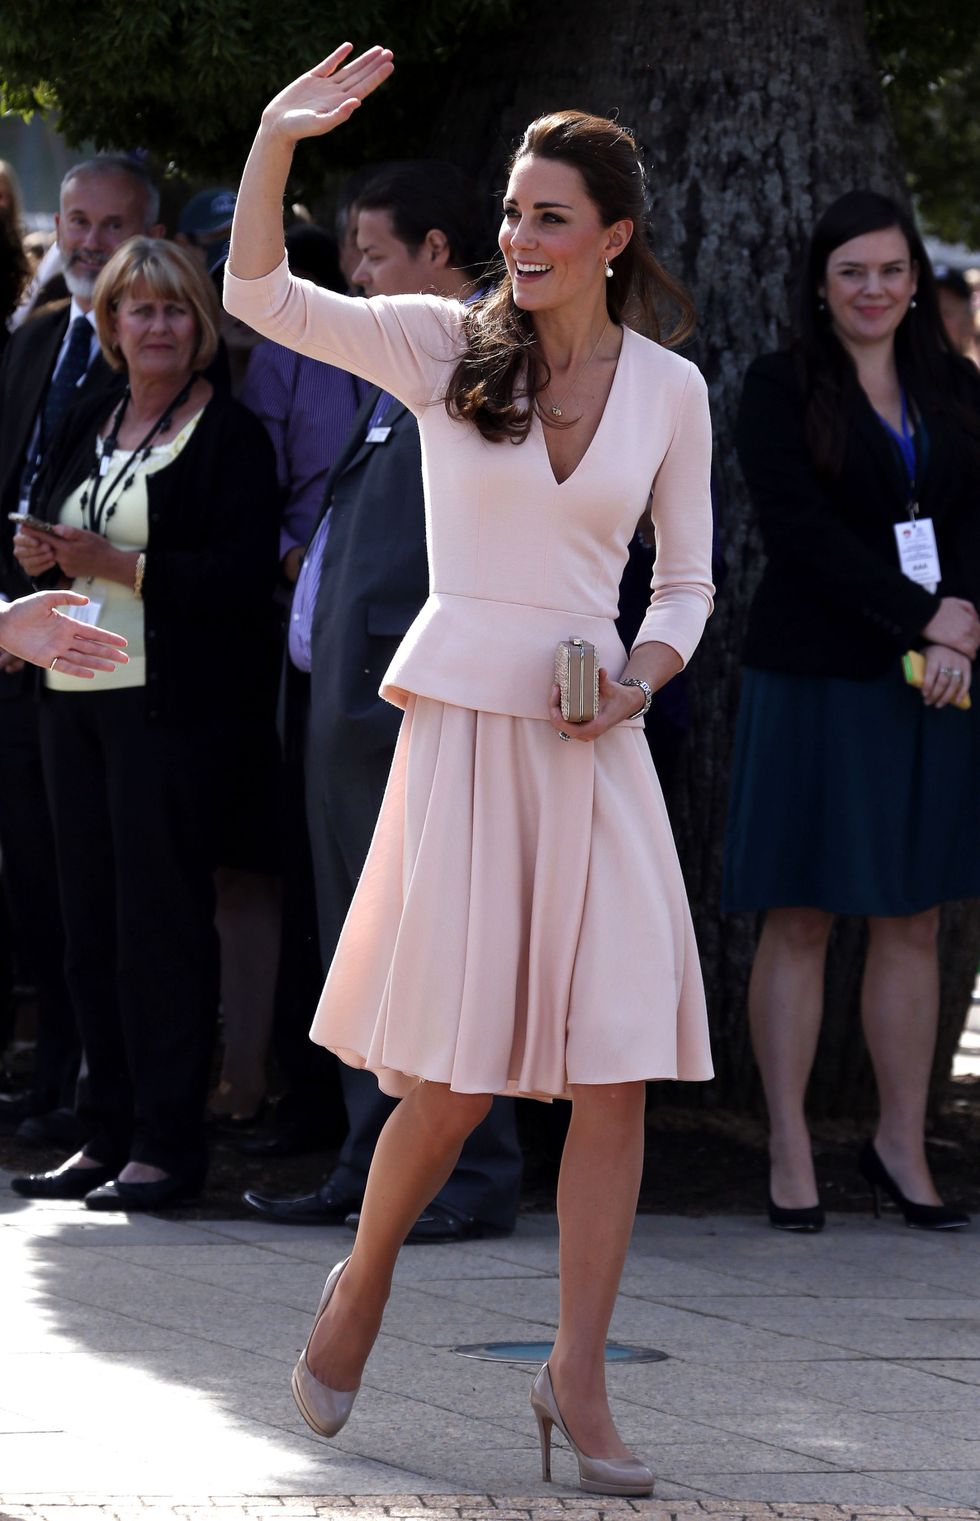 ADELAIDE, AUSTRALIA - APRIL 23:  Catherine, Duchess of Cambridge waves to members of the crowd as she arrives with her husband Prince William, Duke of Cambridge, at the Playford Civic Centre in the Adelaide suburb of Elizabeth on April 23, 2014 in Adelaide, Australia. The Duke and Duchess of Cambridge are on a three-week tour of Australia and New Zealand, the first official trip overseas with their son, Prince George of Cambridge.  (Photo by David Gray - Pool/Getty Images)